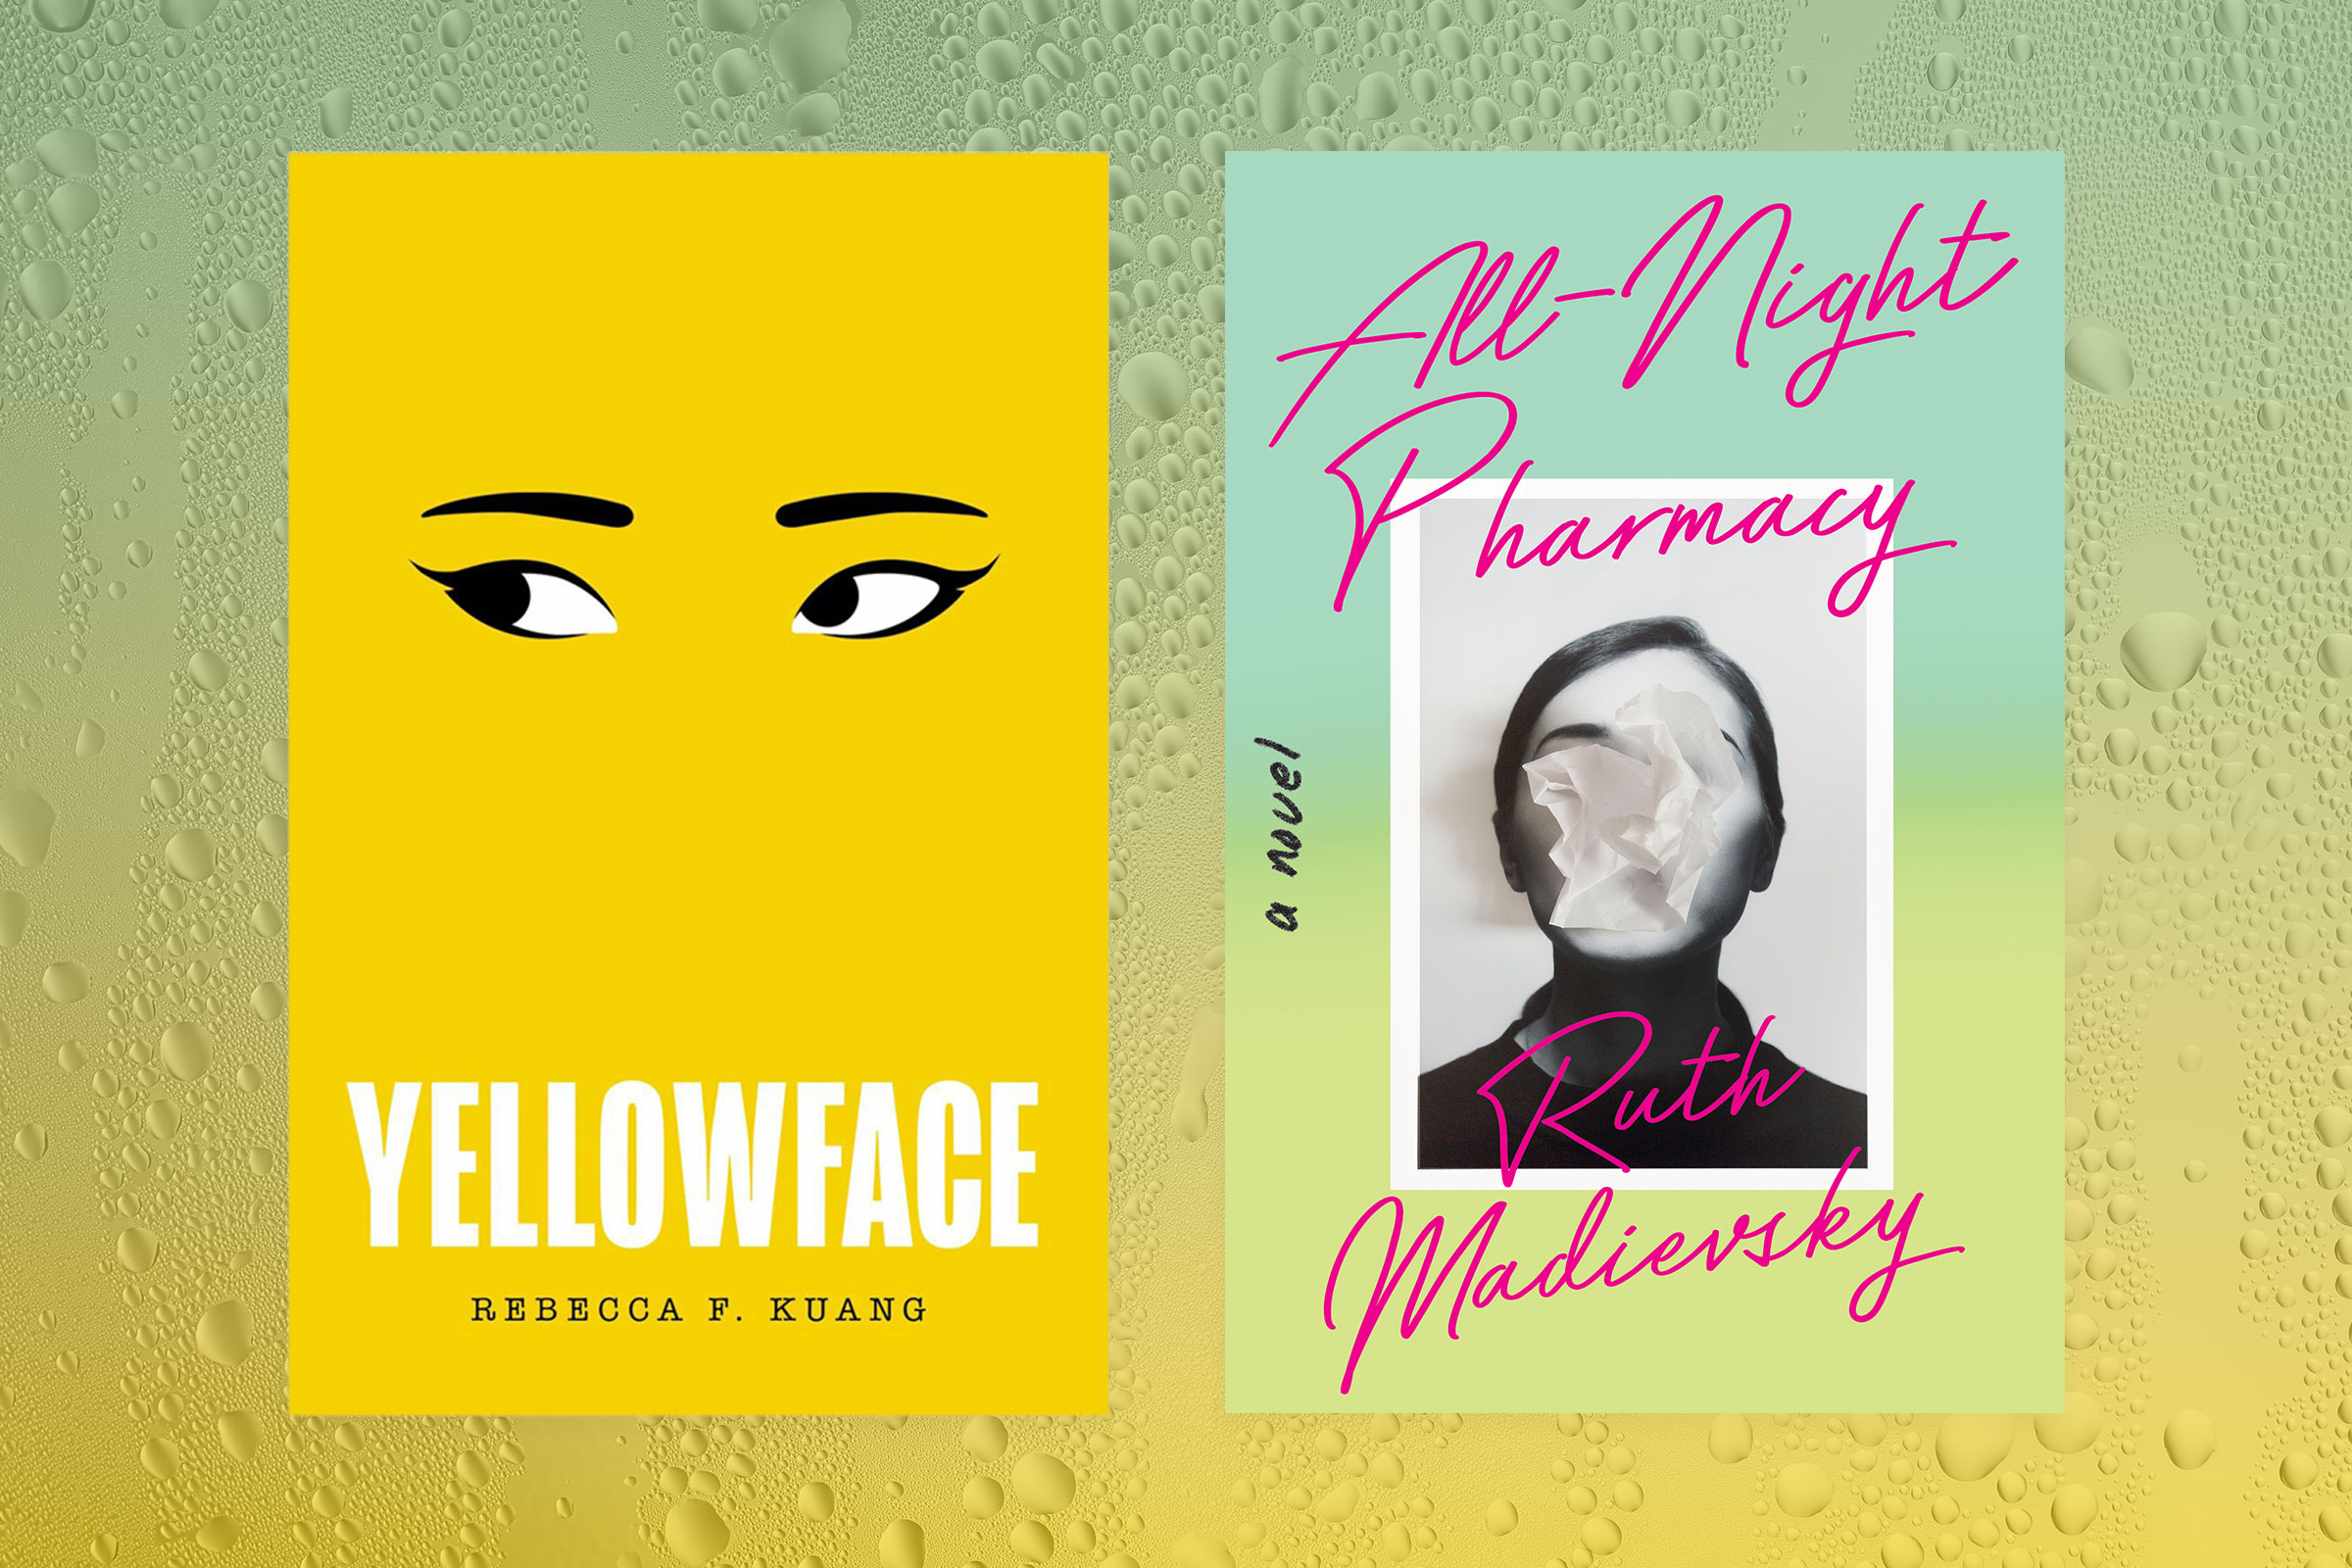 It's the season of anxious-girl books, from R.F. Kuang's 'Yellowface' to Ruth Madievsky's 'All-Night Pharmacy'